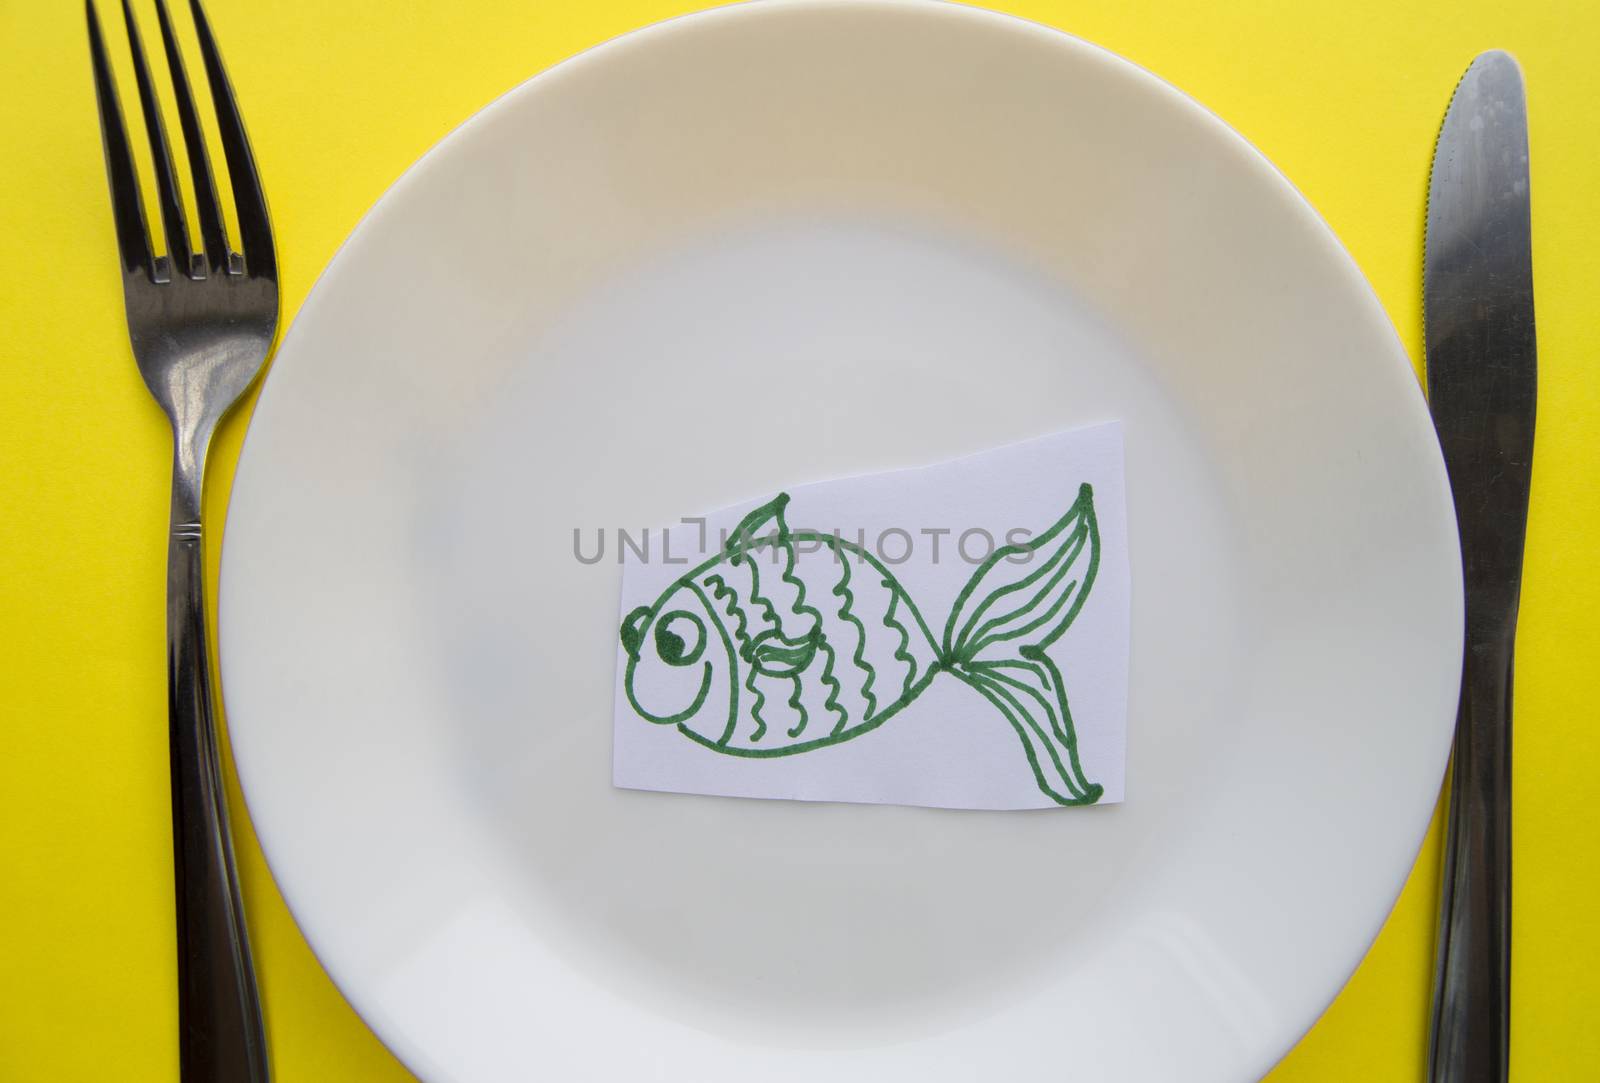 The celebration of April fool's Day, a Plate with a fork and knife and a paper fish on a yellow colored background. Humor by claire_lucia